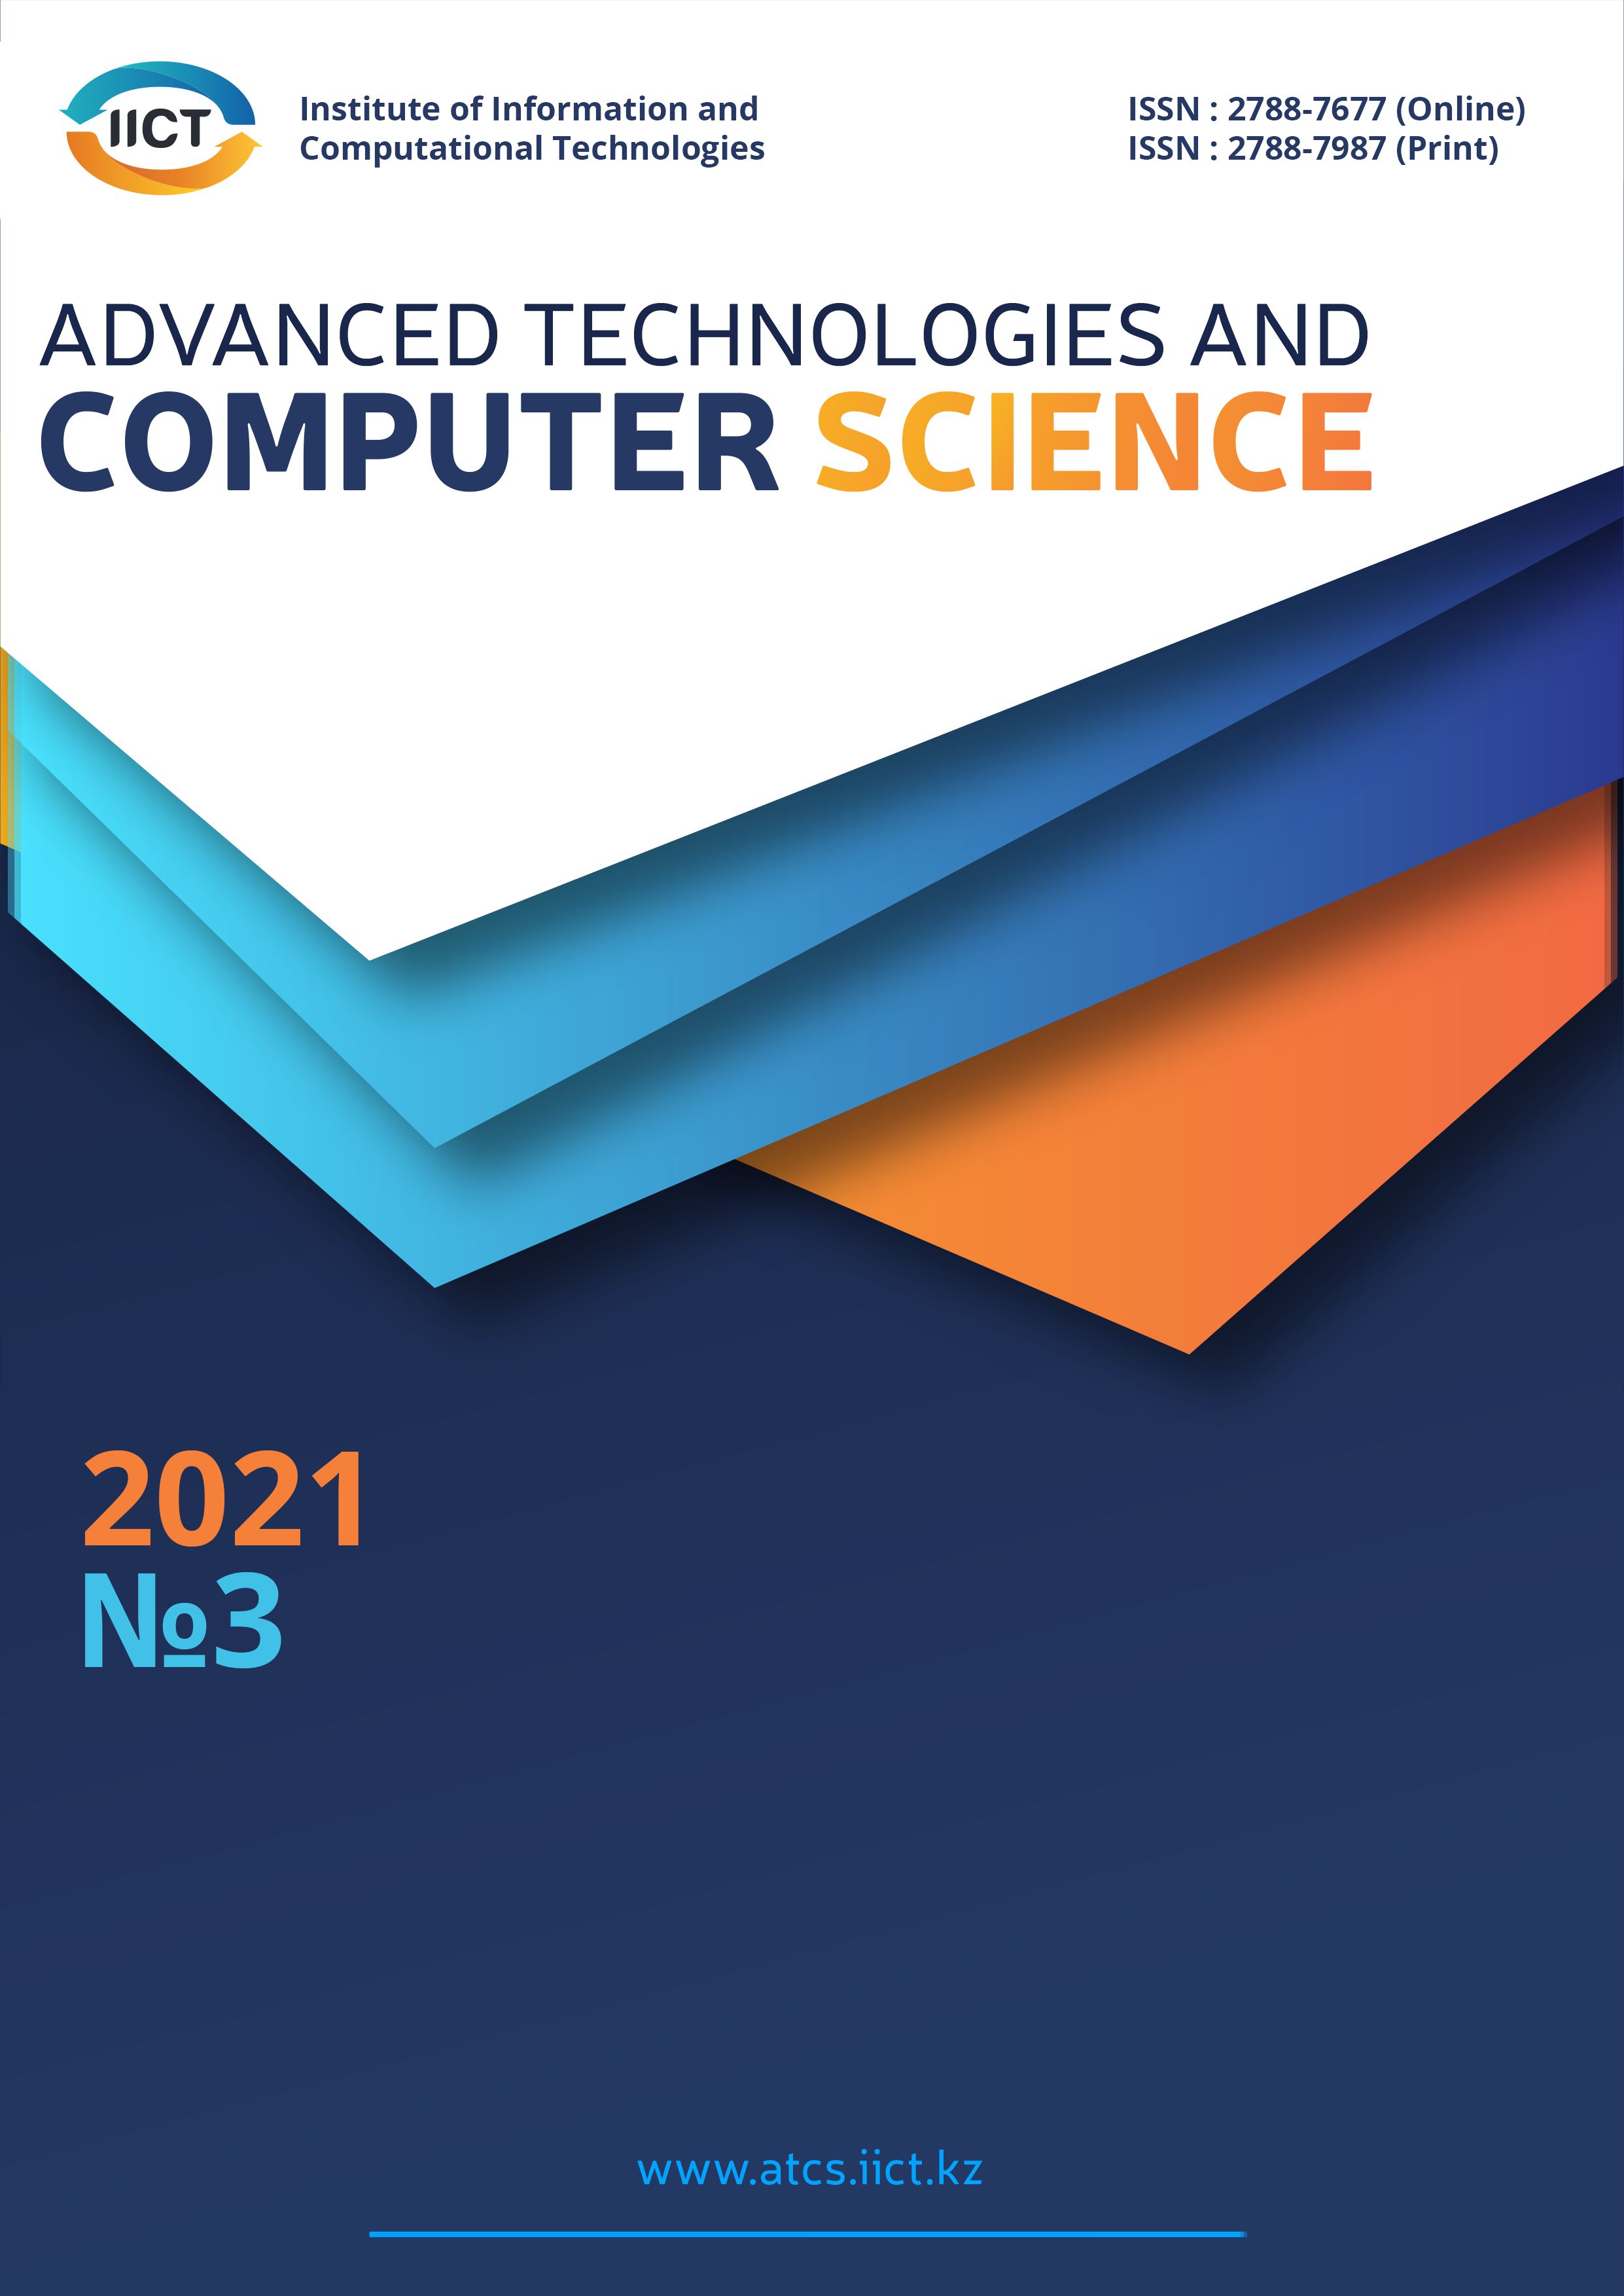 					View No. 3 (2021): Advanced technologies and computer science
				